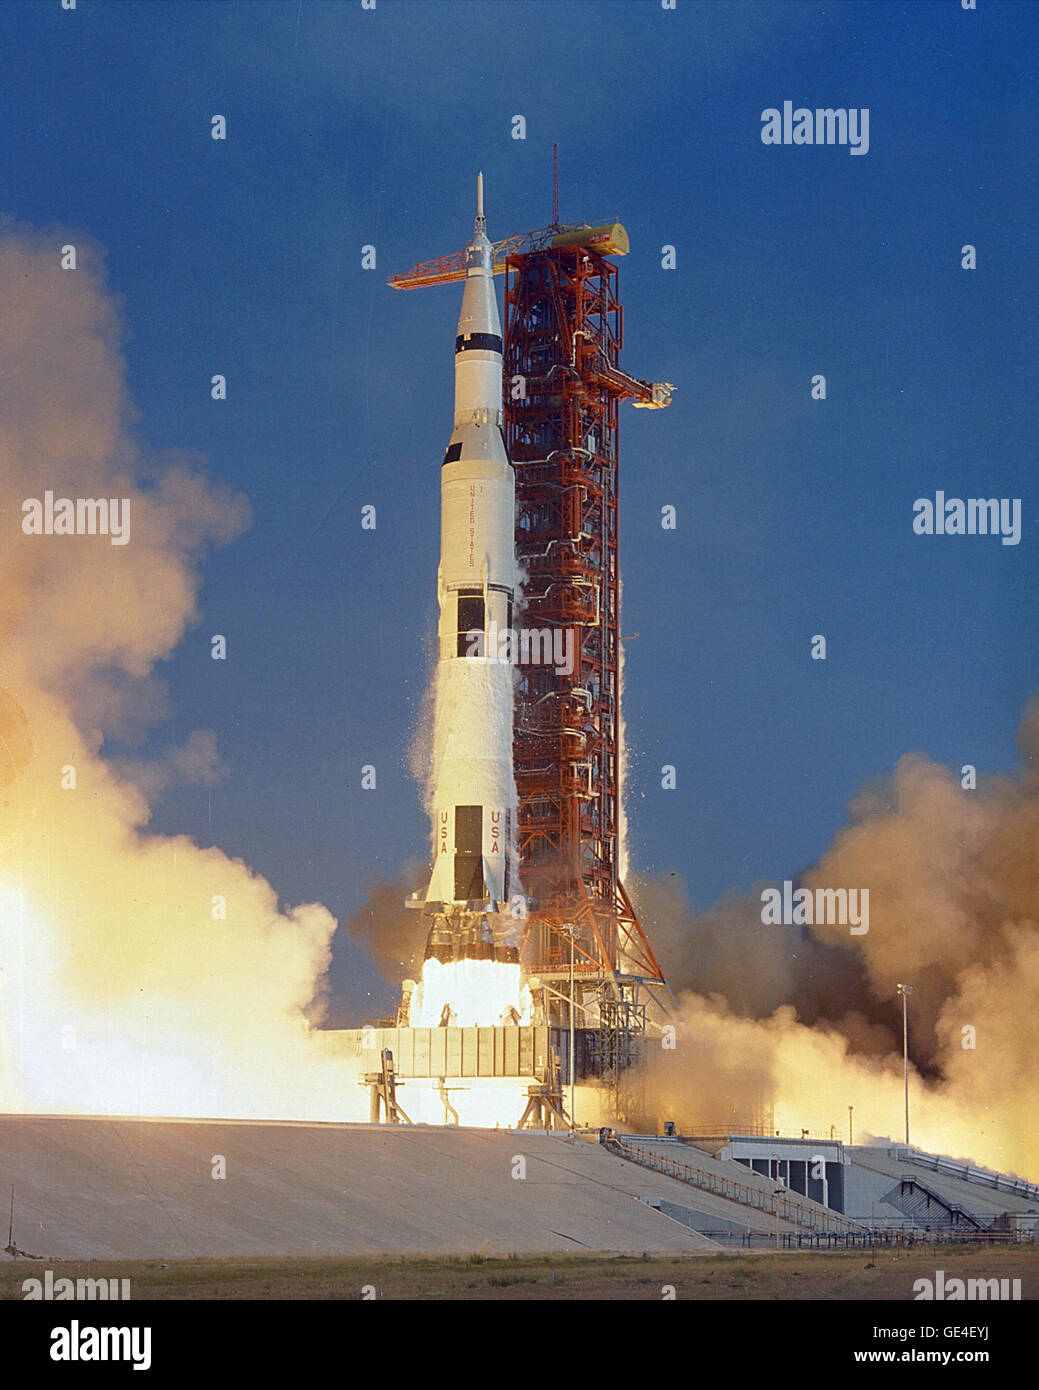 (July 16, 1969) The Apollo 11 Saturn V space vehicle lifts off with astronauts Neil A. Armstrong, Michael Collins and Edwin E. Aldrin, Jr., at 9:32 a.m. EDT July 16, 1969, from Kennedy Space Center's Launch Complex 39A.  Image # : 69PC-0447 Stock Photo